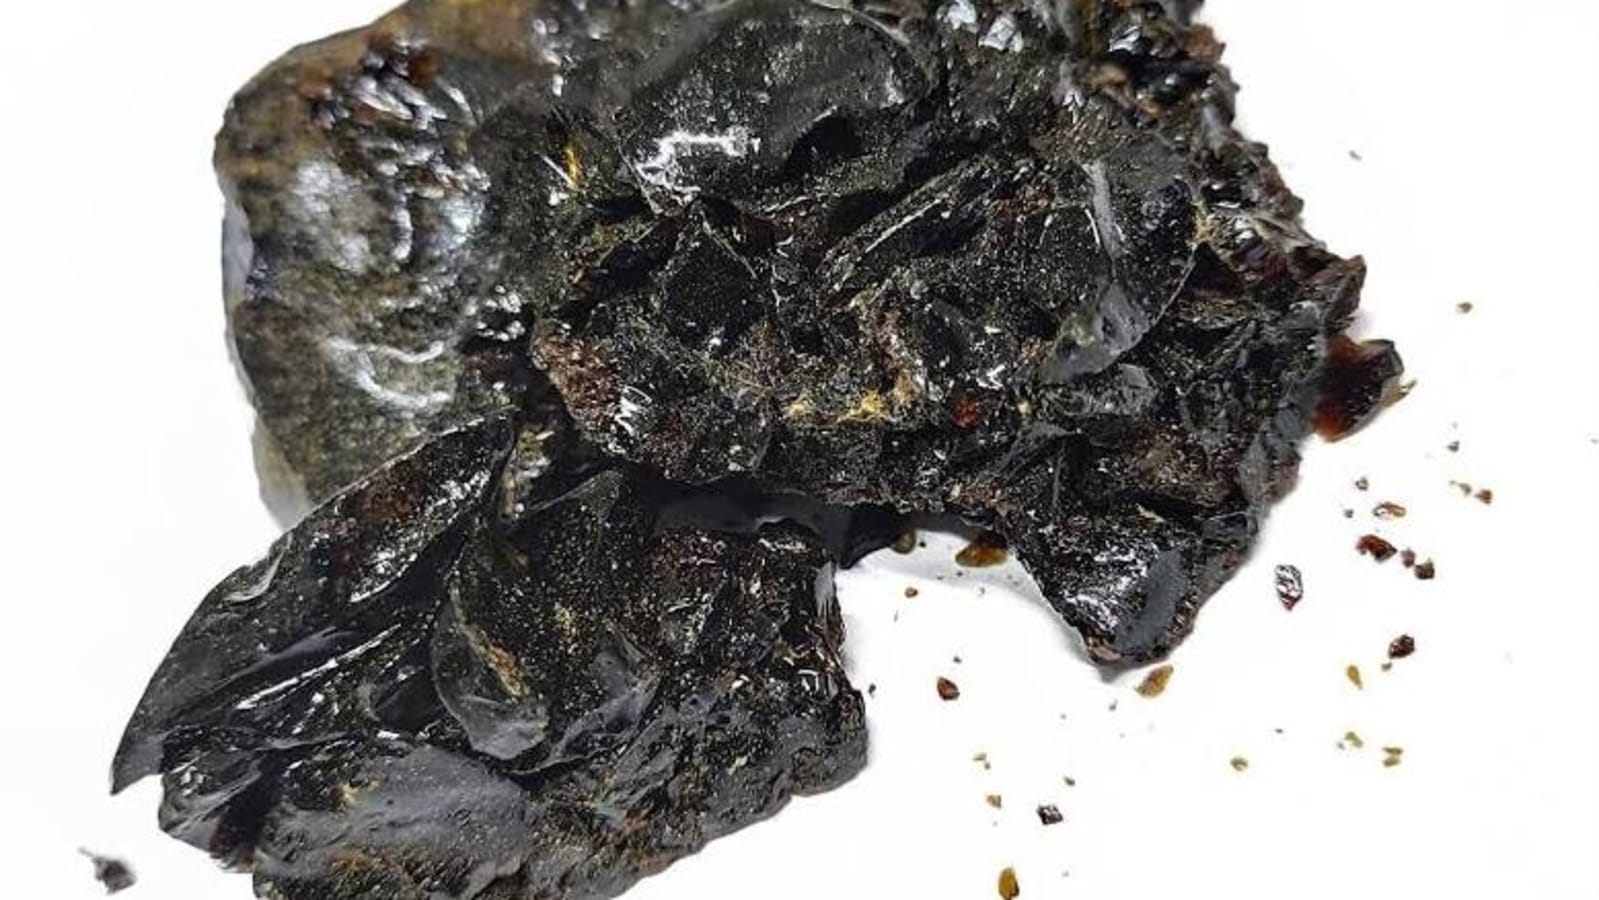 How safe is pure shilajit for health? Let's find out!